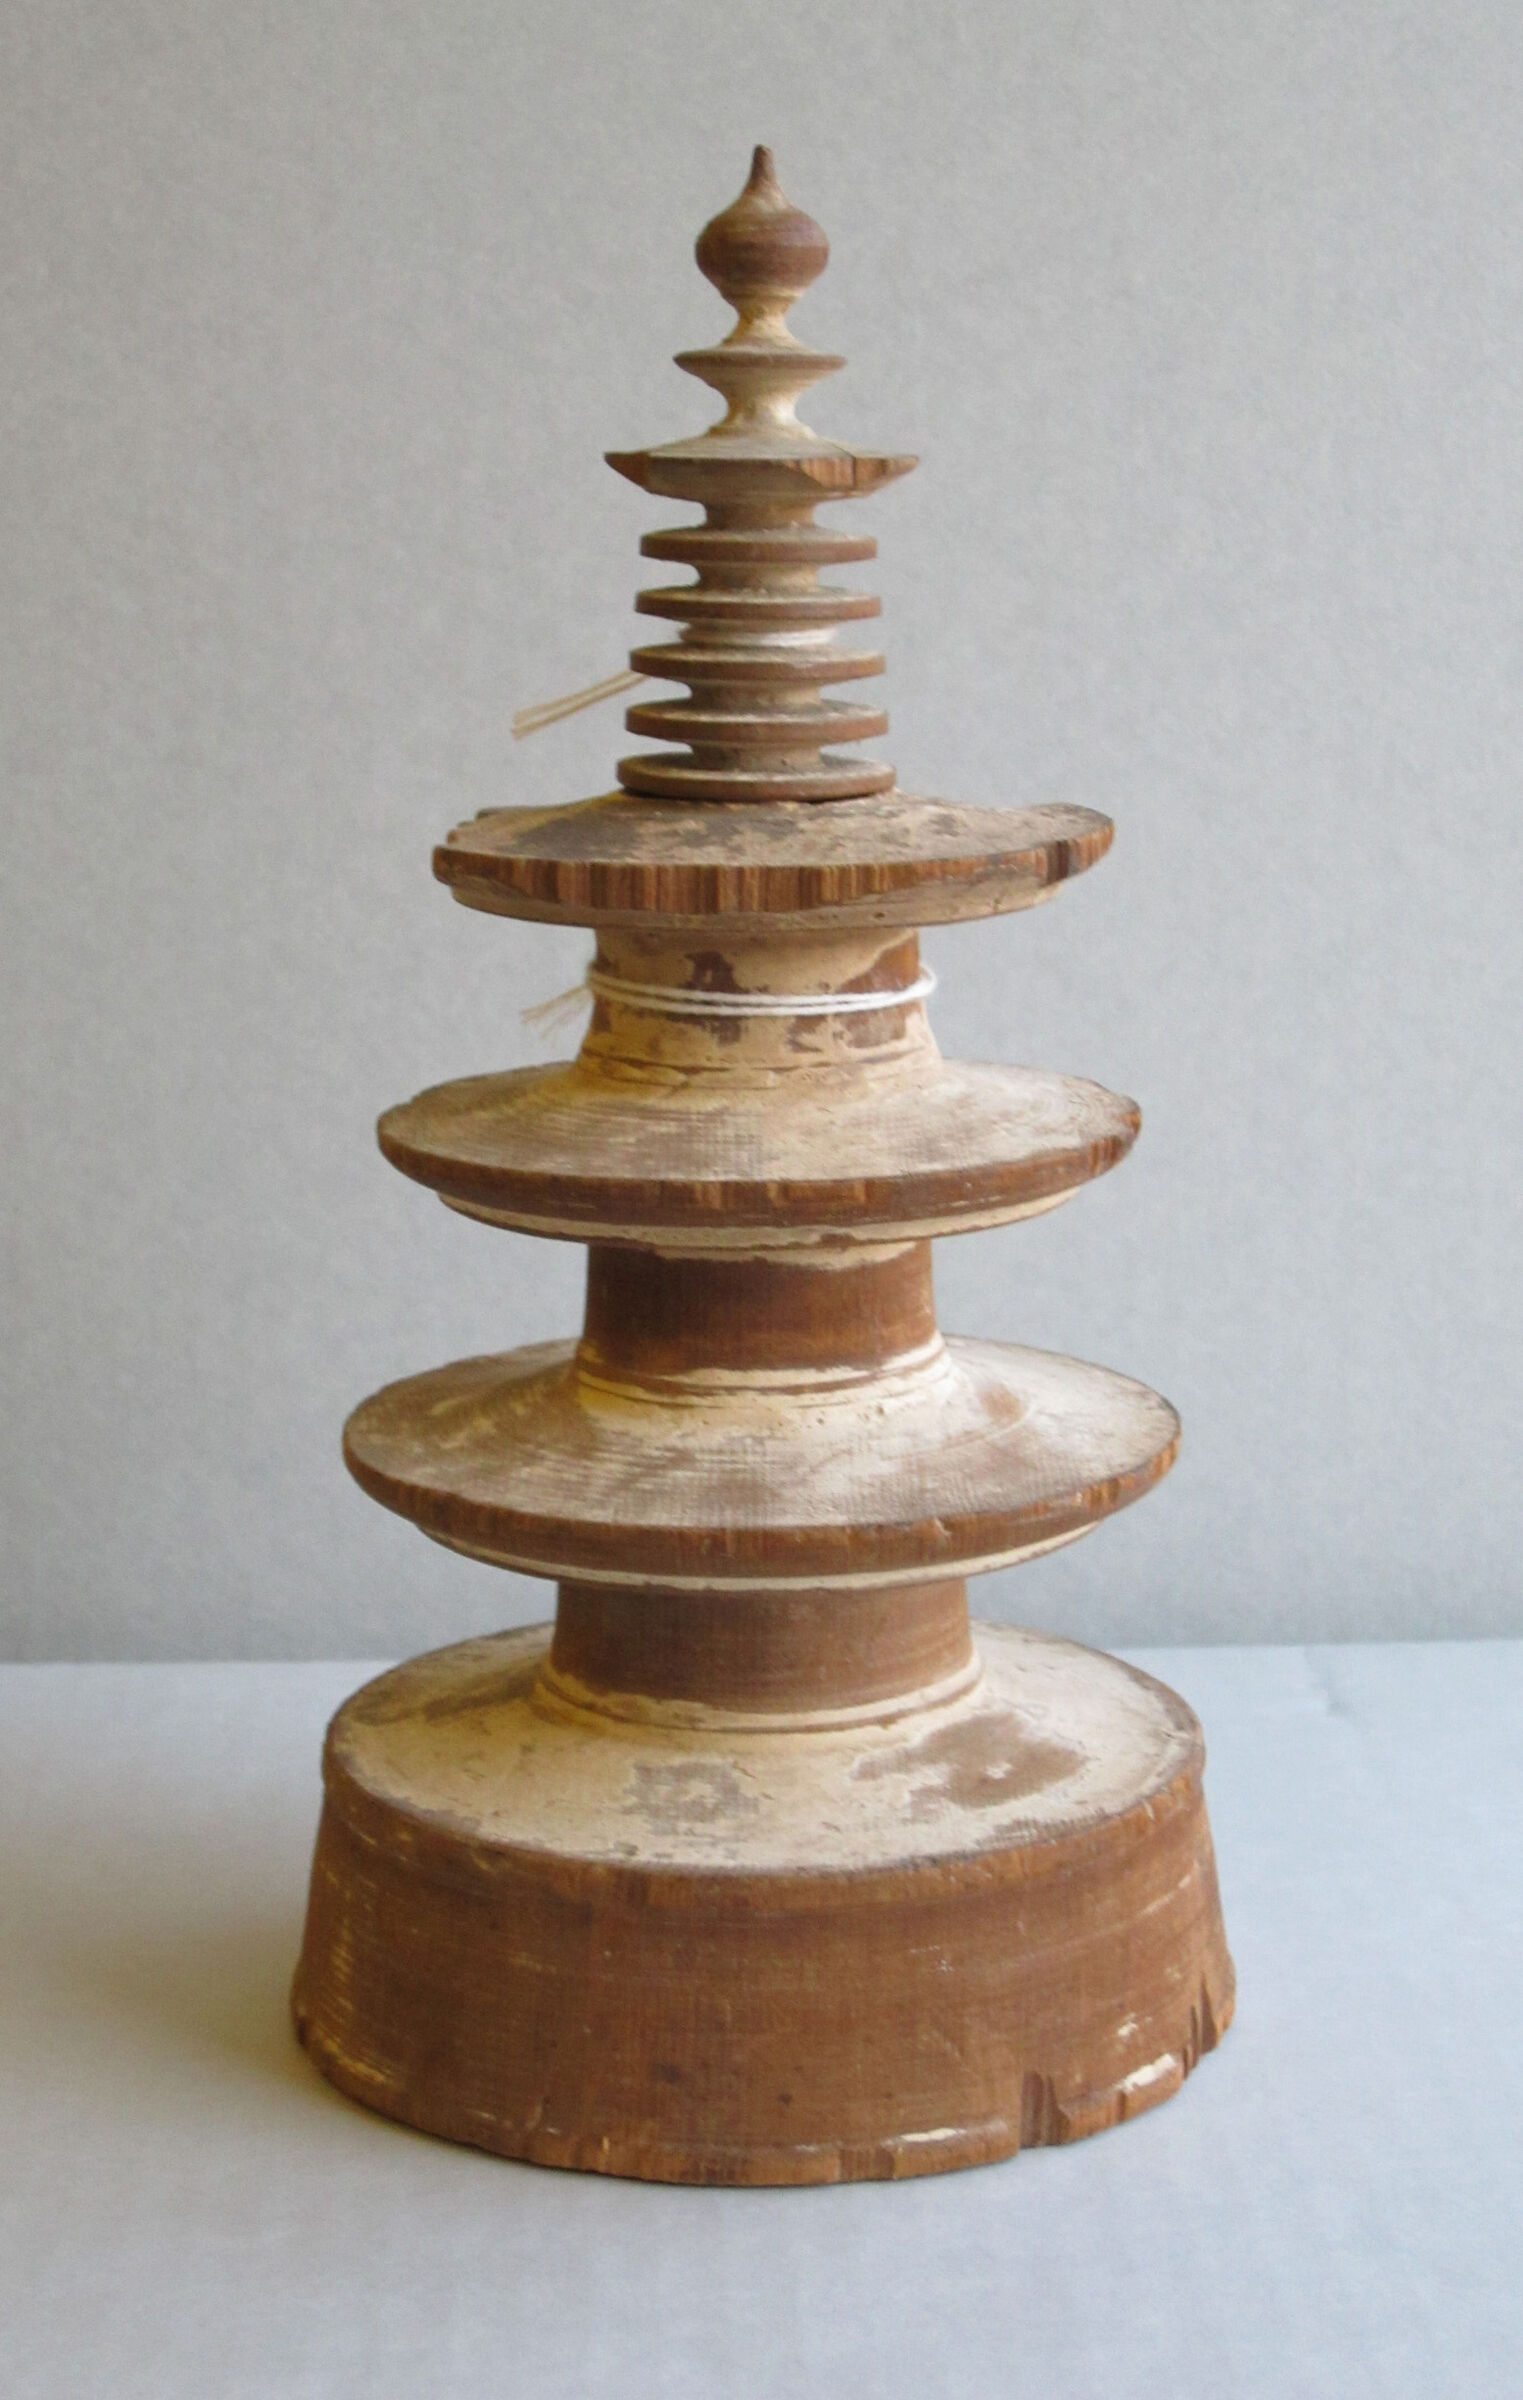 Miniature Wood Stupa With Dharani, One Of A Set Known As The 